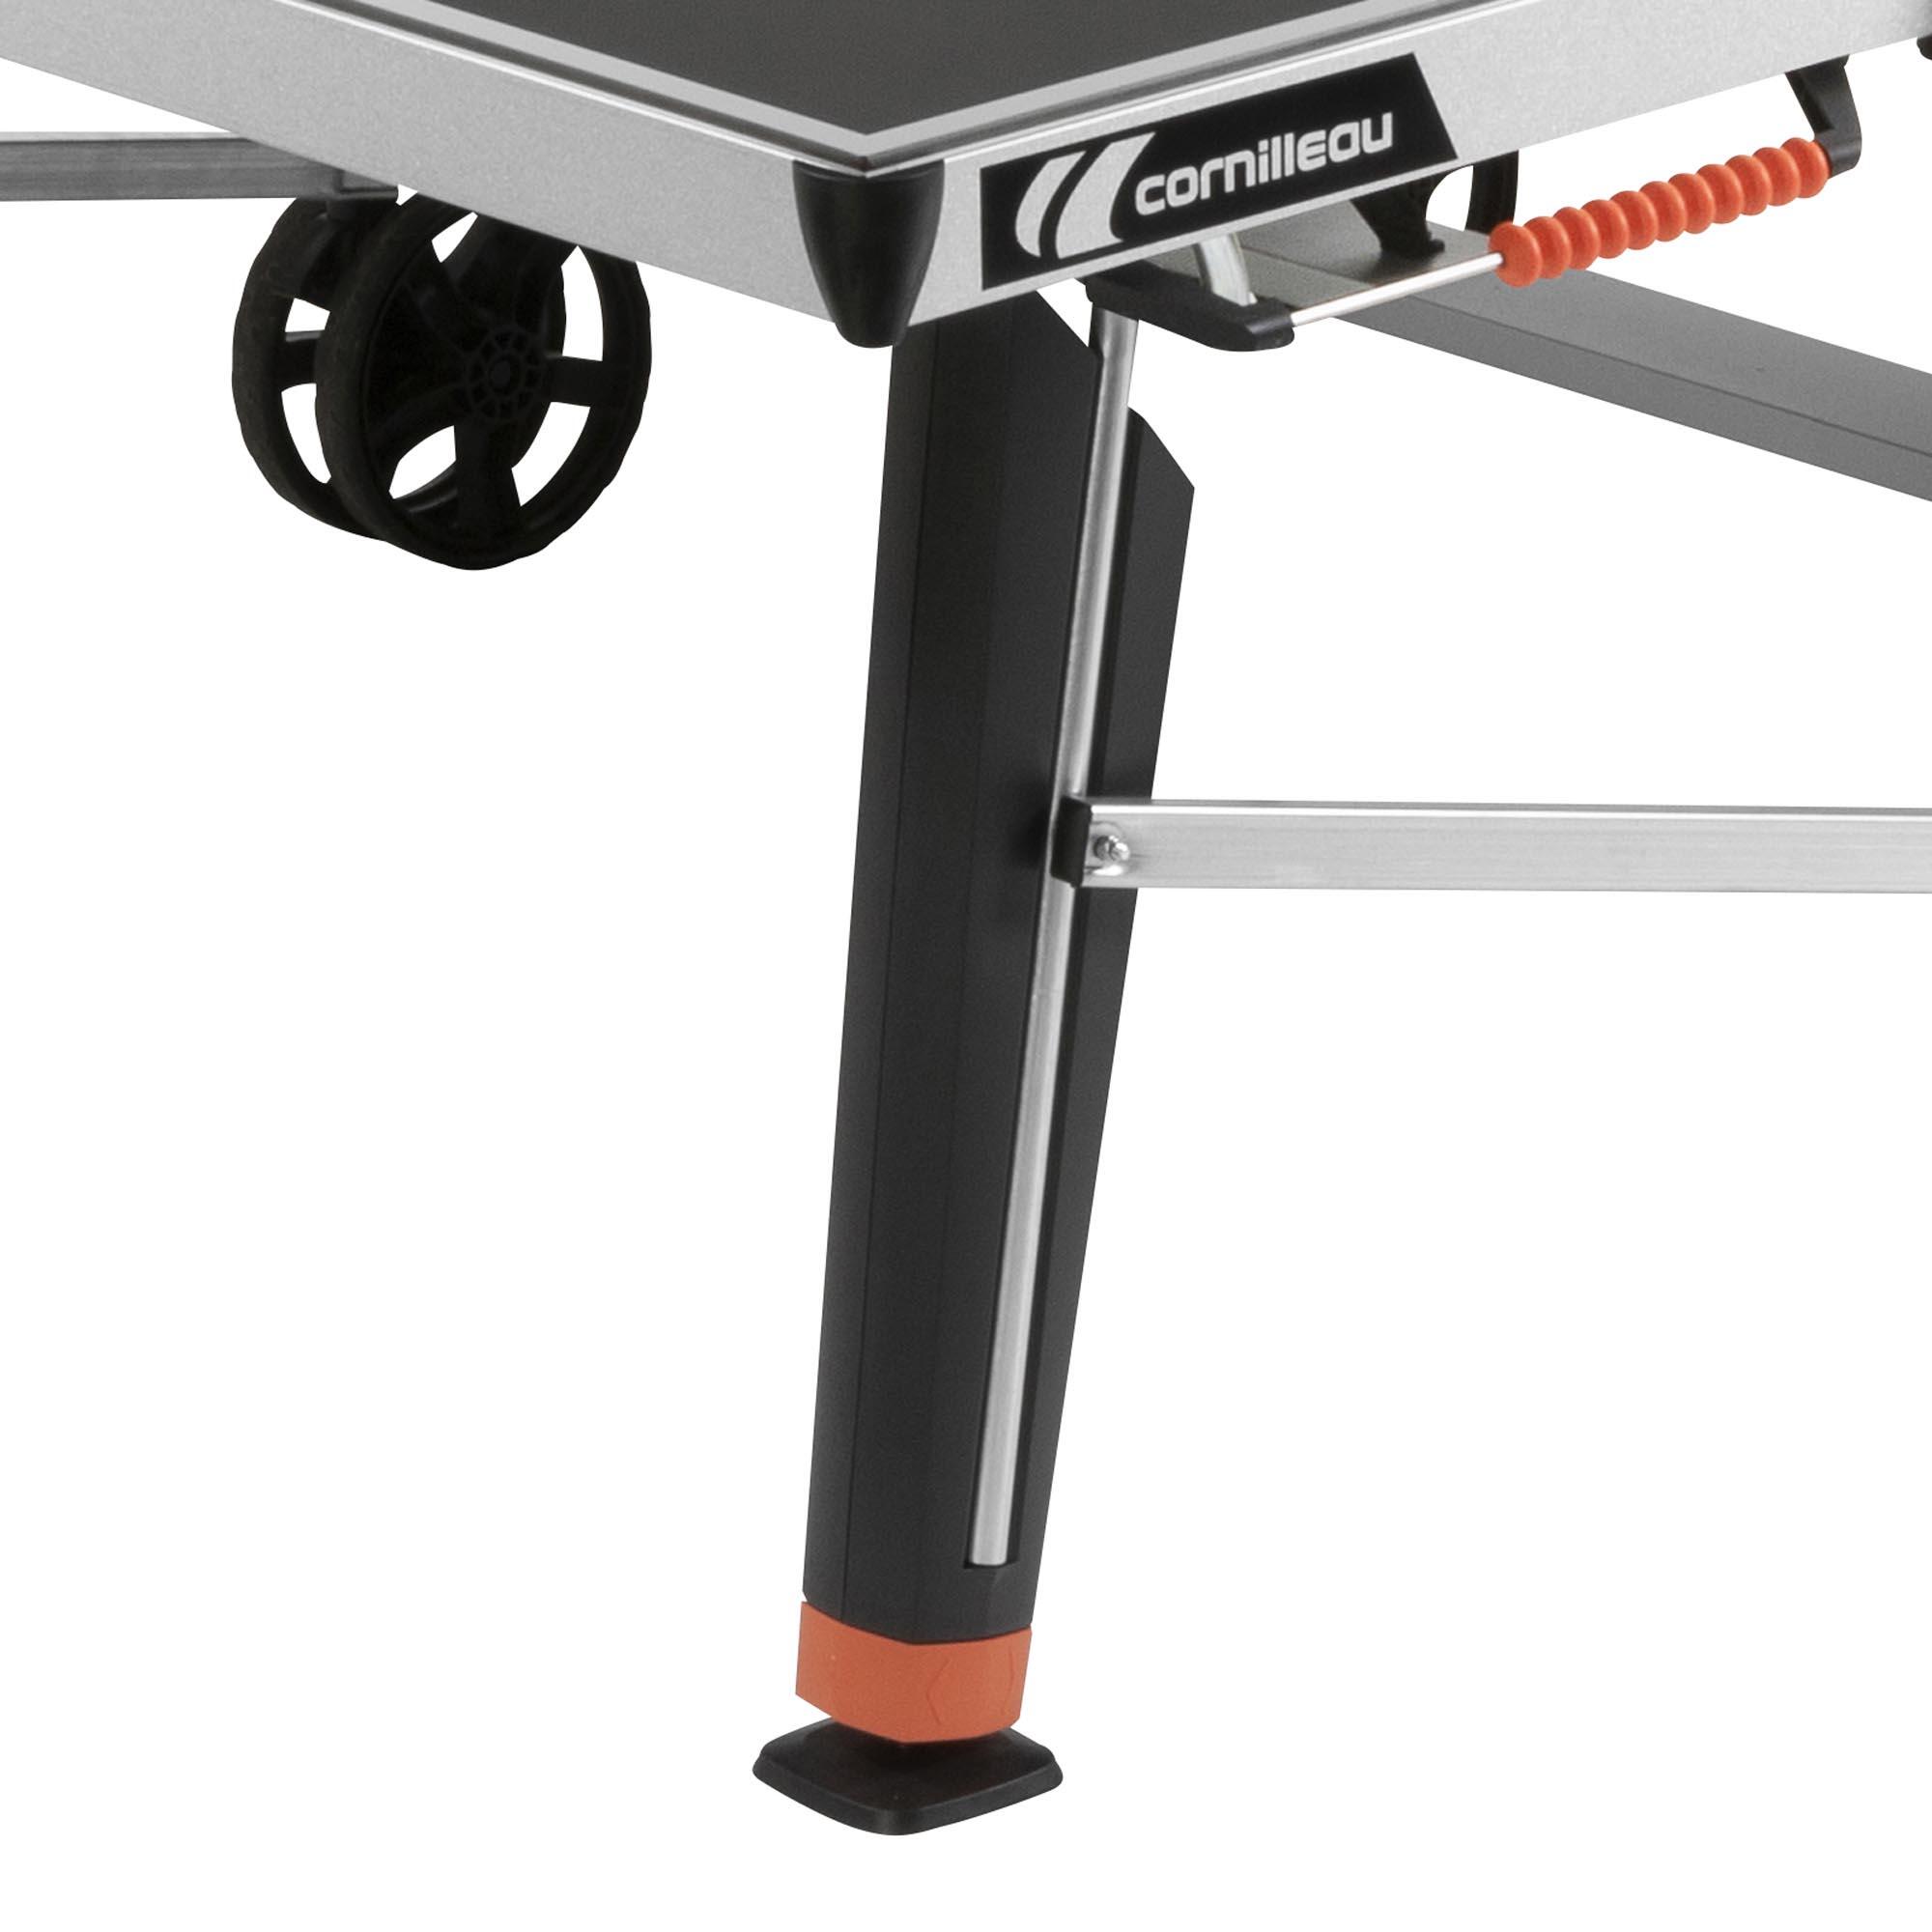 Outdoor Table Tennis Table 600X - Black 11/23